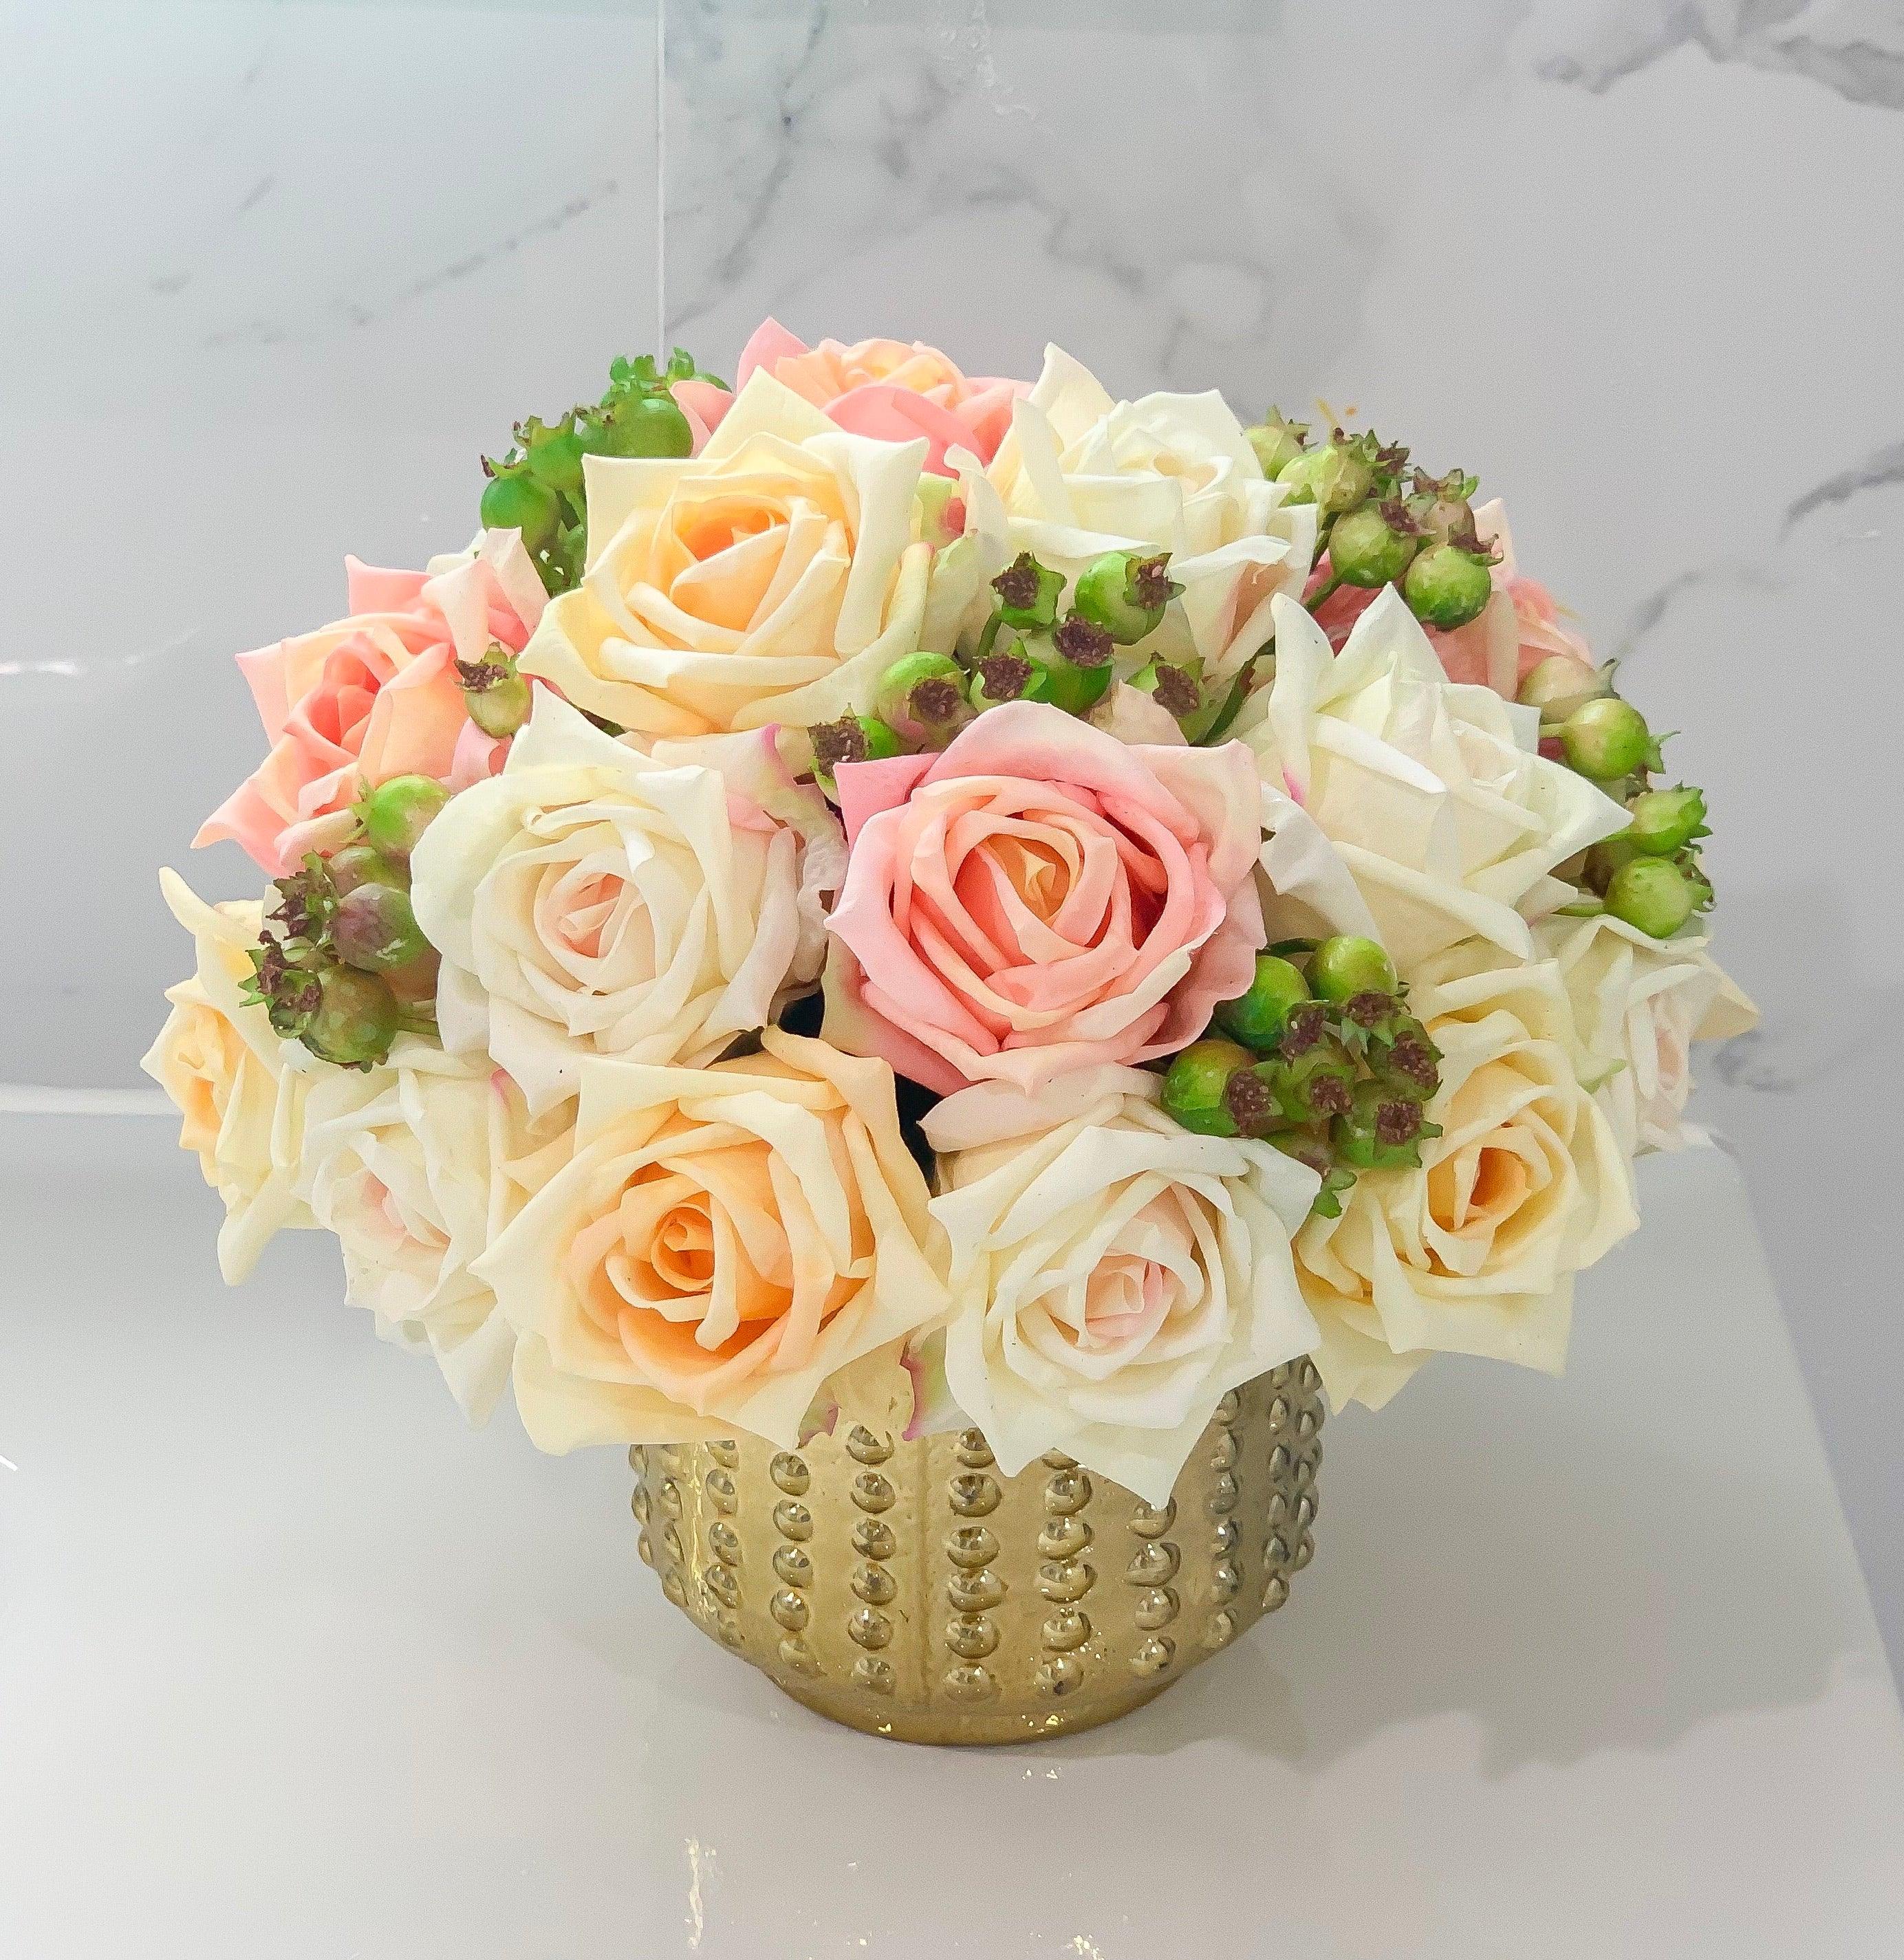 Flovery Everlasting Real Touch Mixed Rose Centerpiece - Flovery